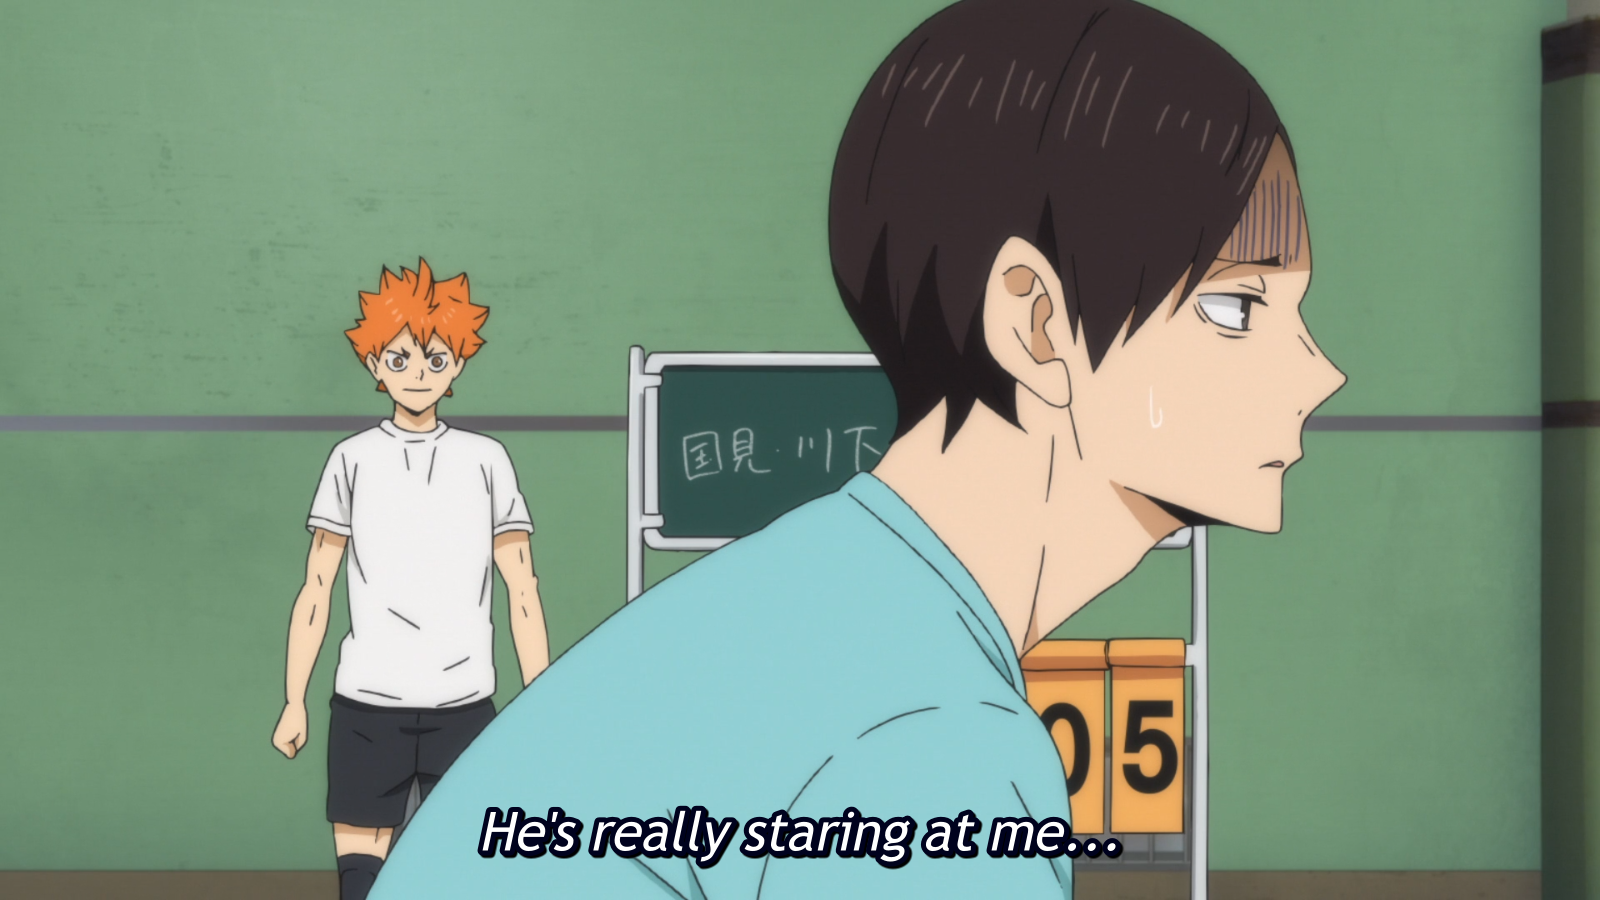 Haikyuu!!: To the Top ep4 - The Coach - I drink and watch anime